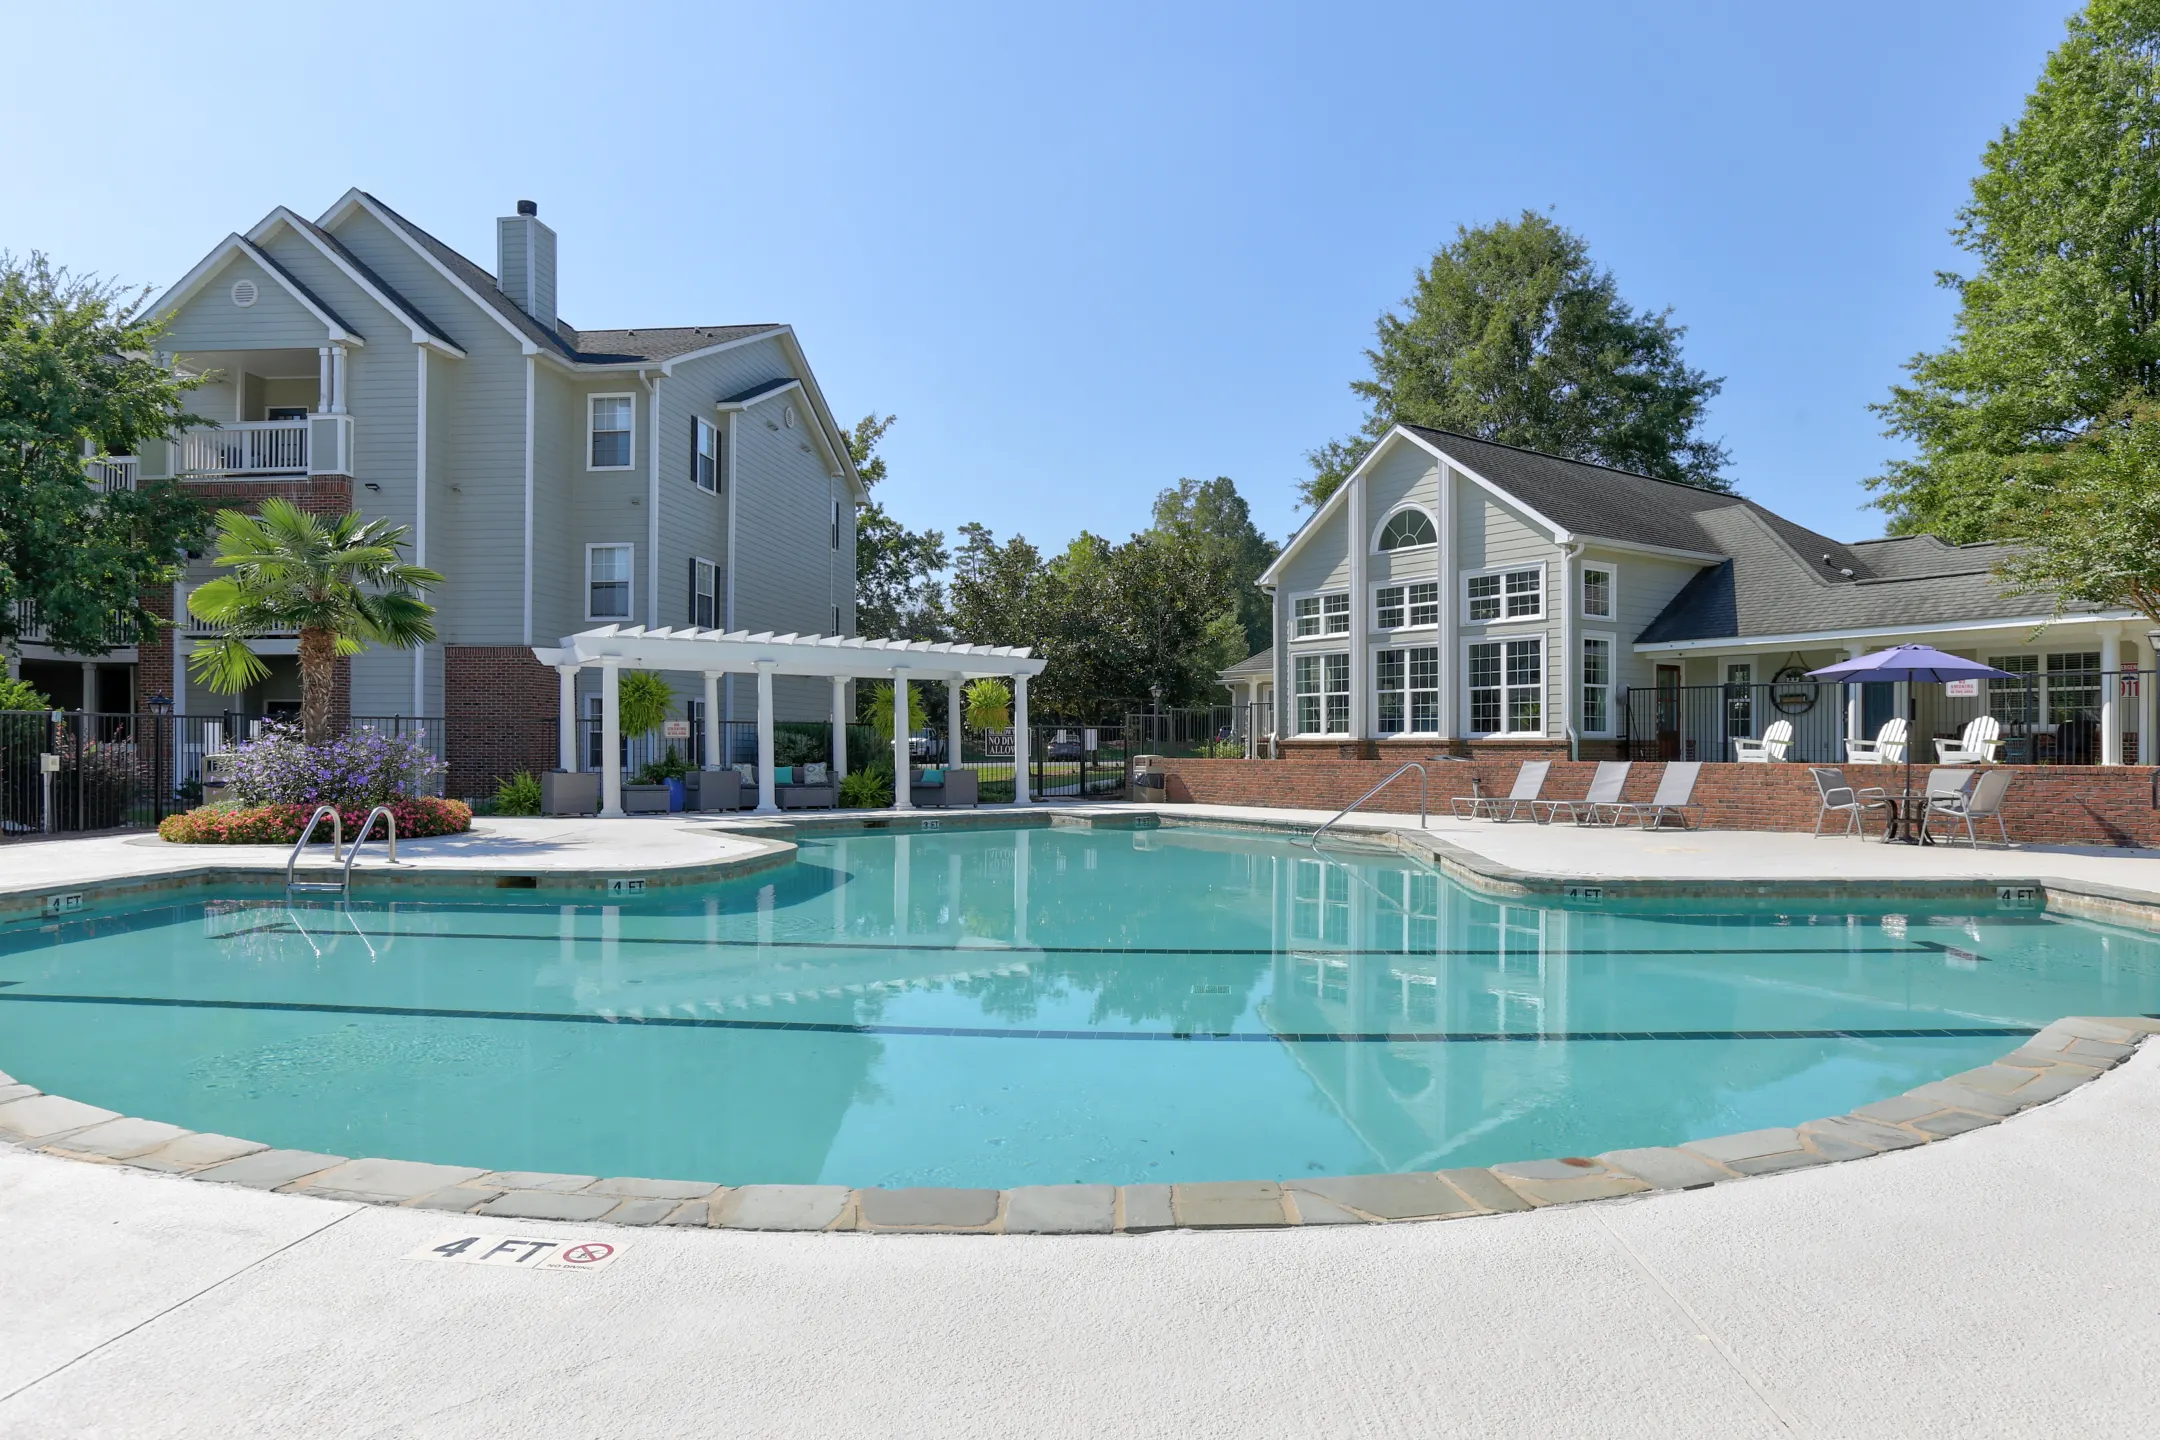 Pool - Village at Lake Wylie - Clover, SC